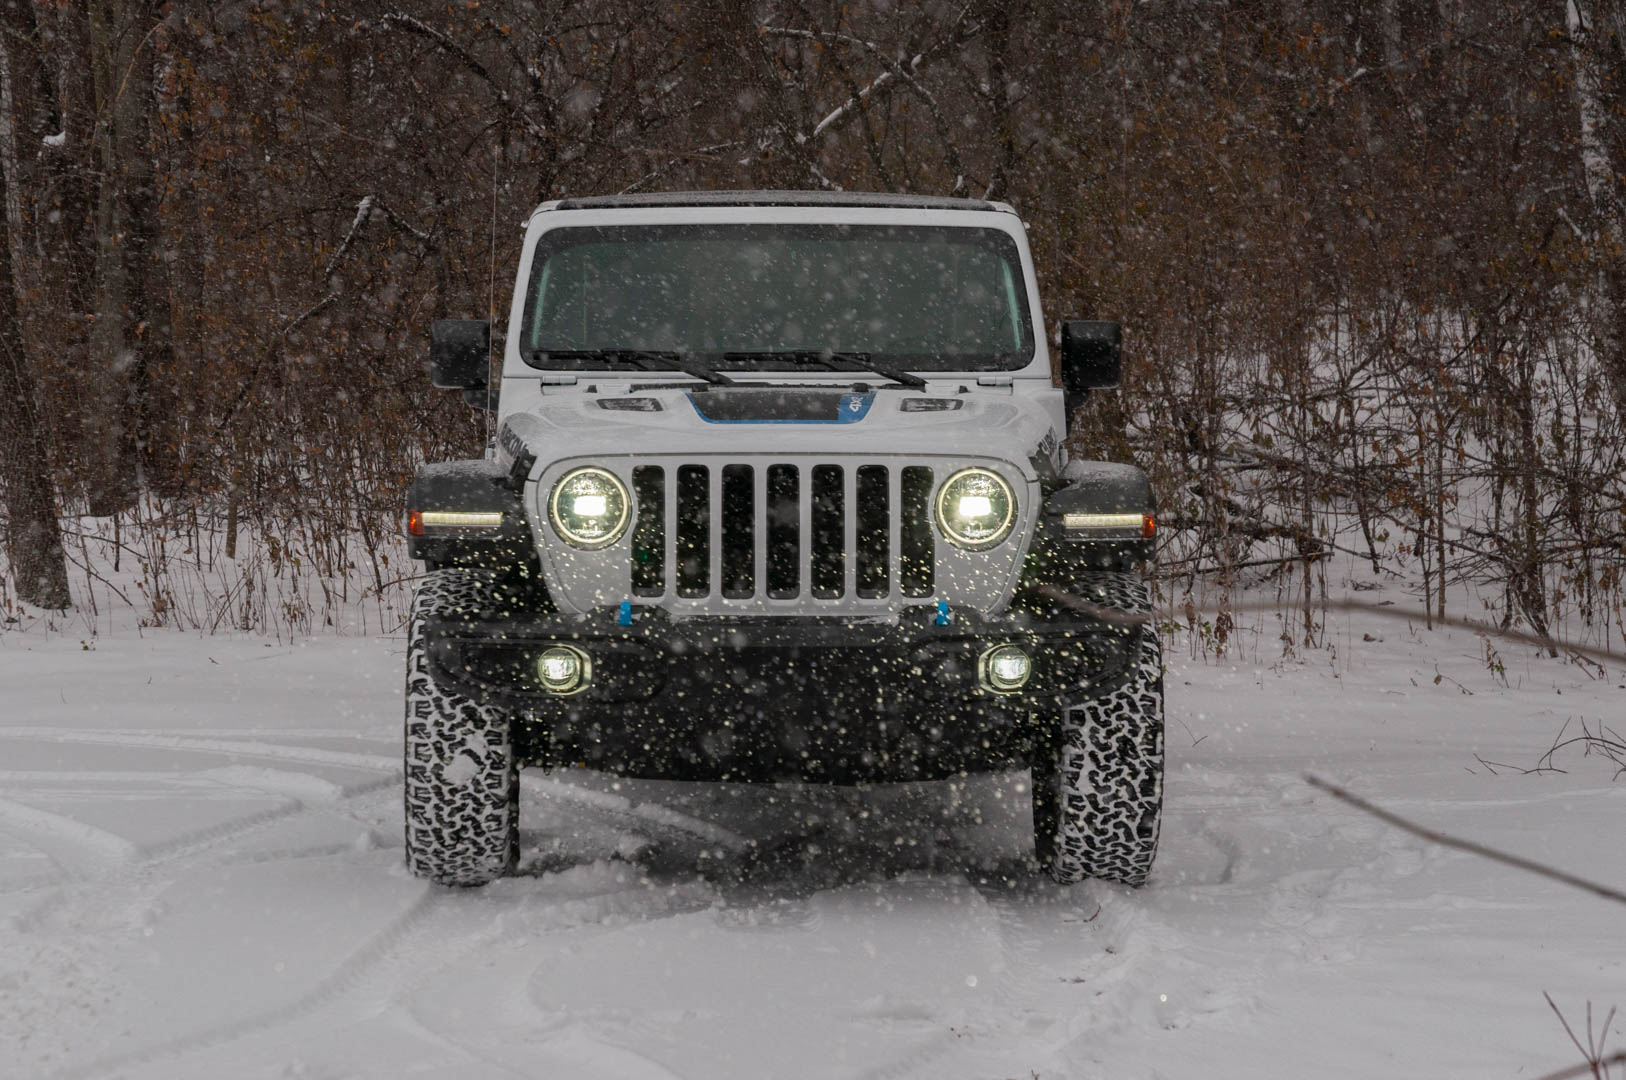 Wrangler 4xe winter drive, Mazda rotary details, GM small electric truck: The Week in Reverse